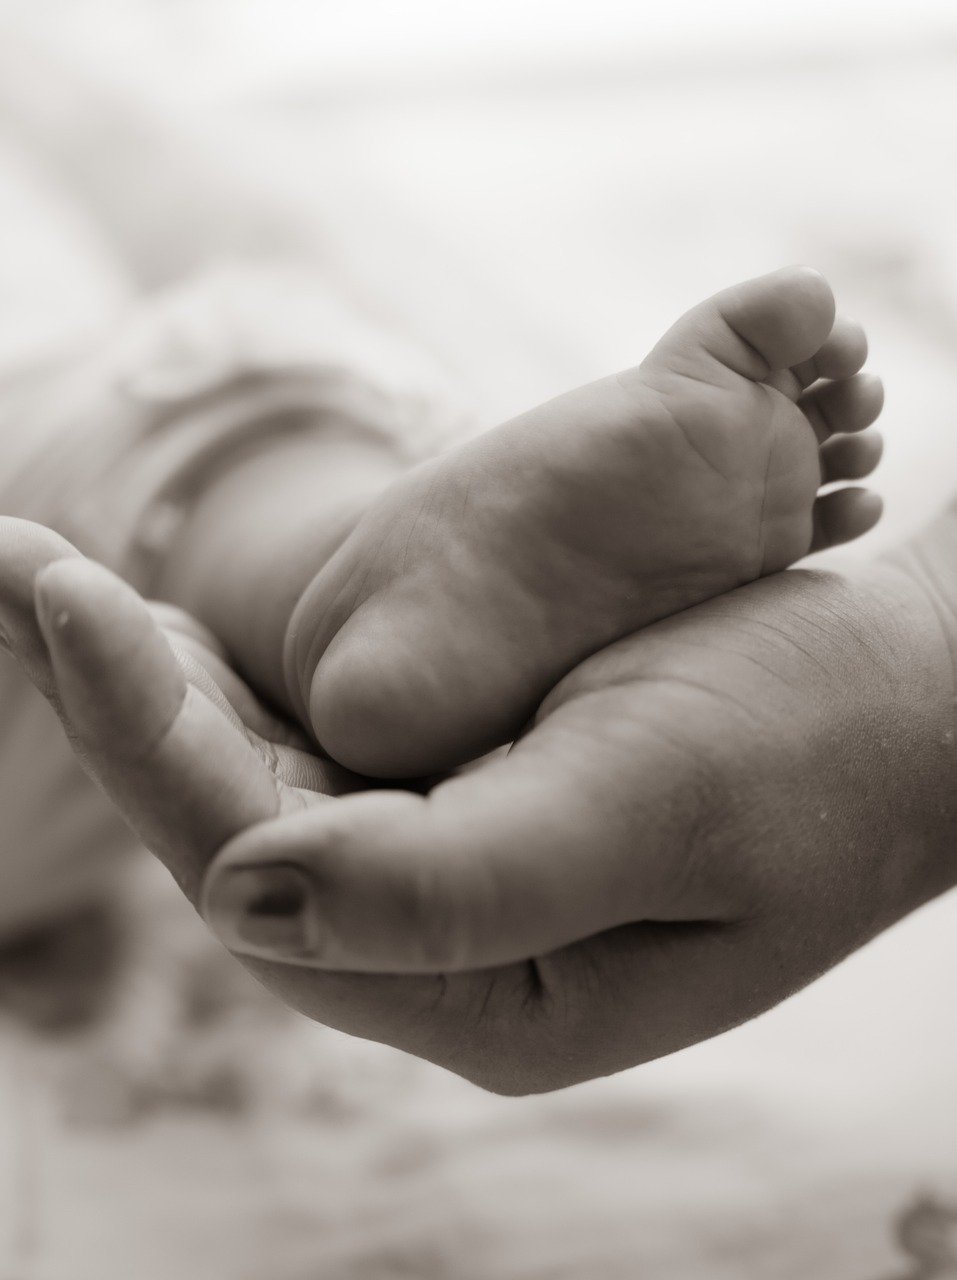 Turned-in toes | BabyCenter